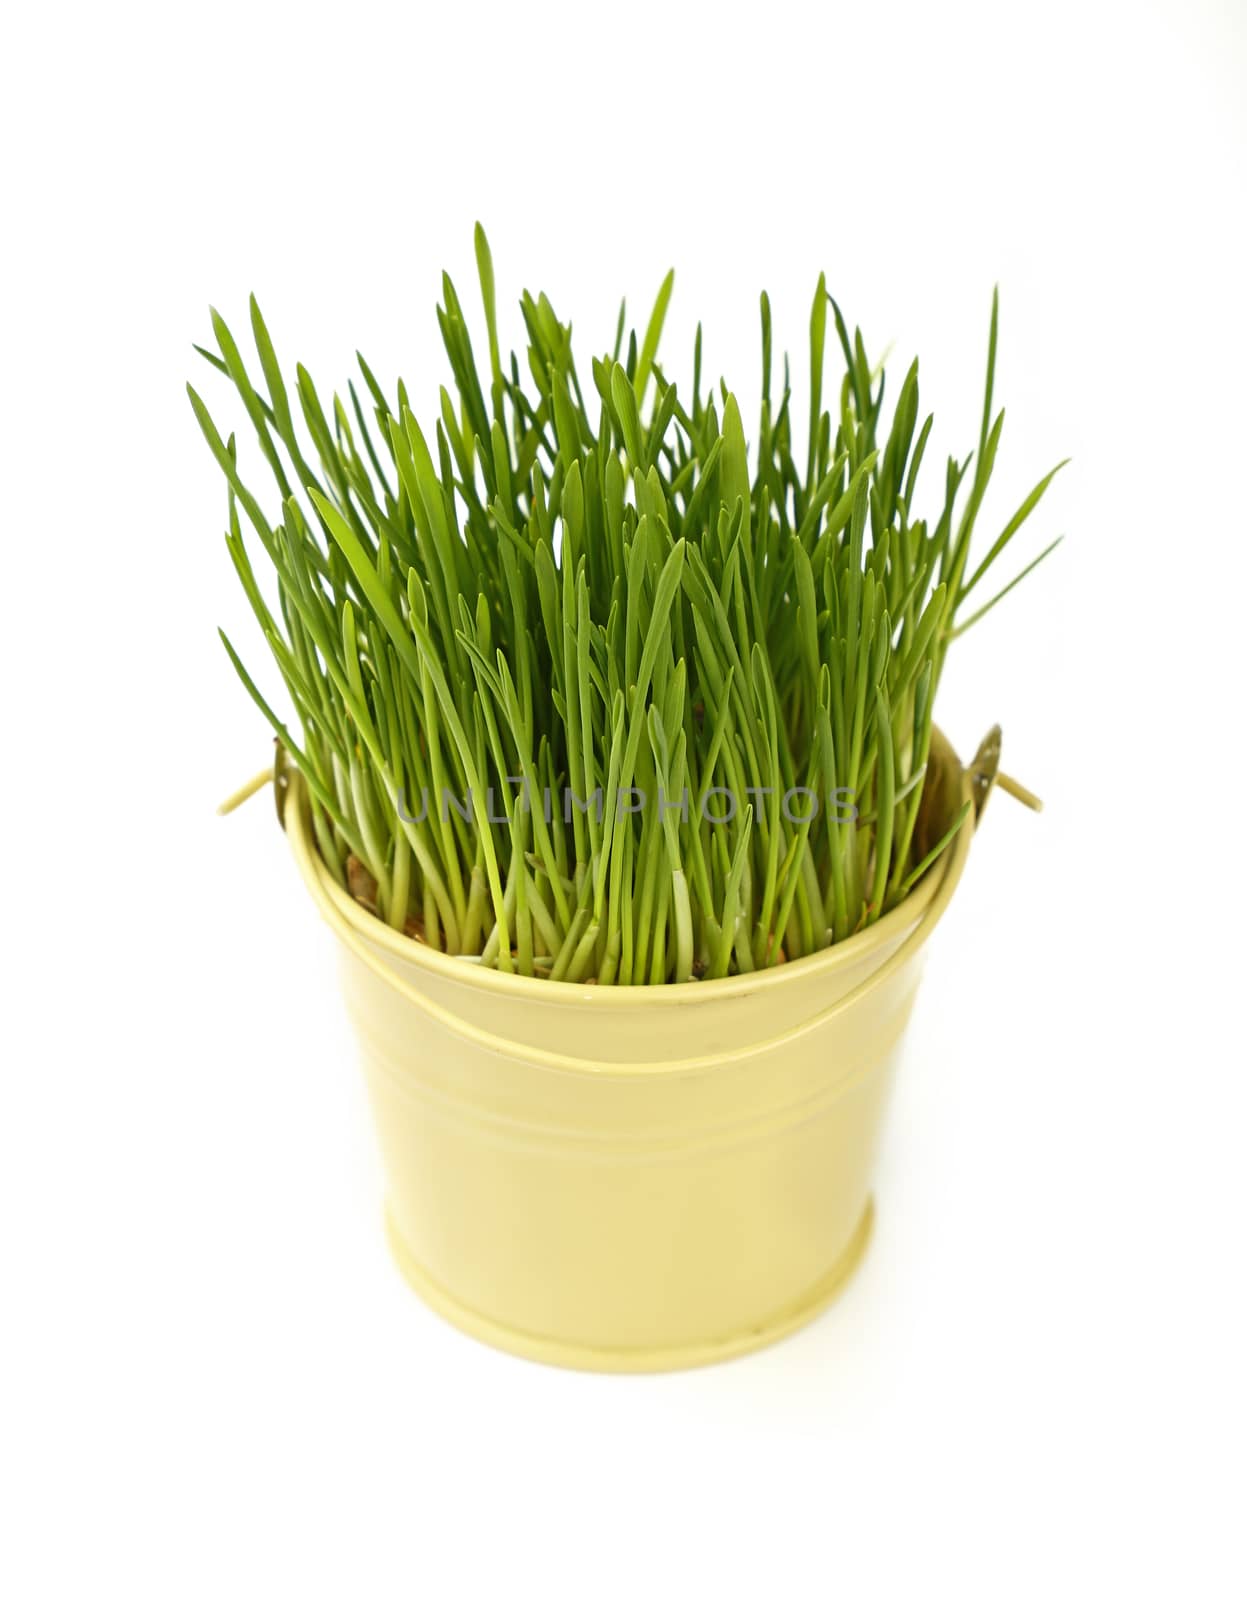 Spring fresh green grass growing in small painted metal bucket, close up over white background, high angle view